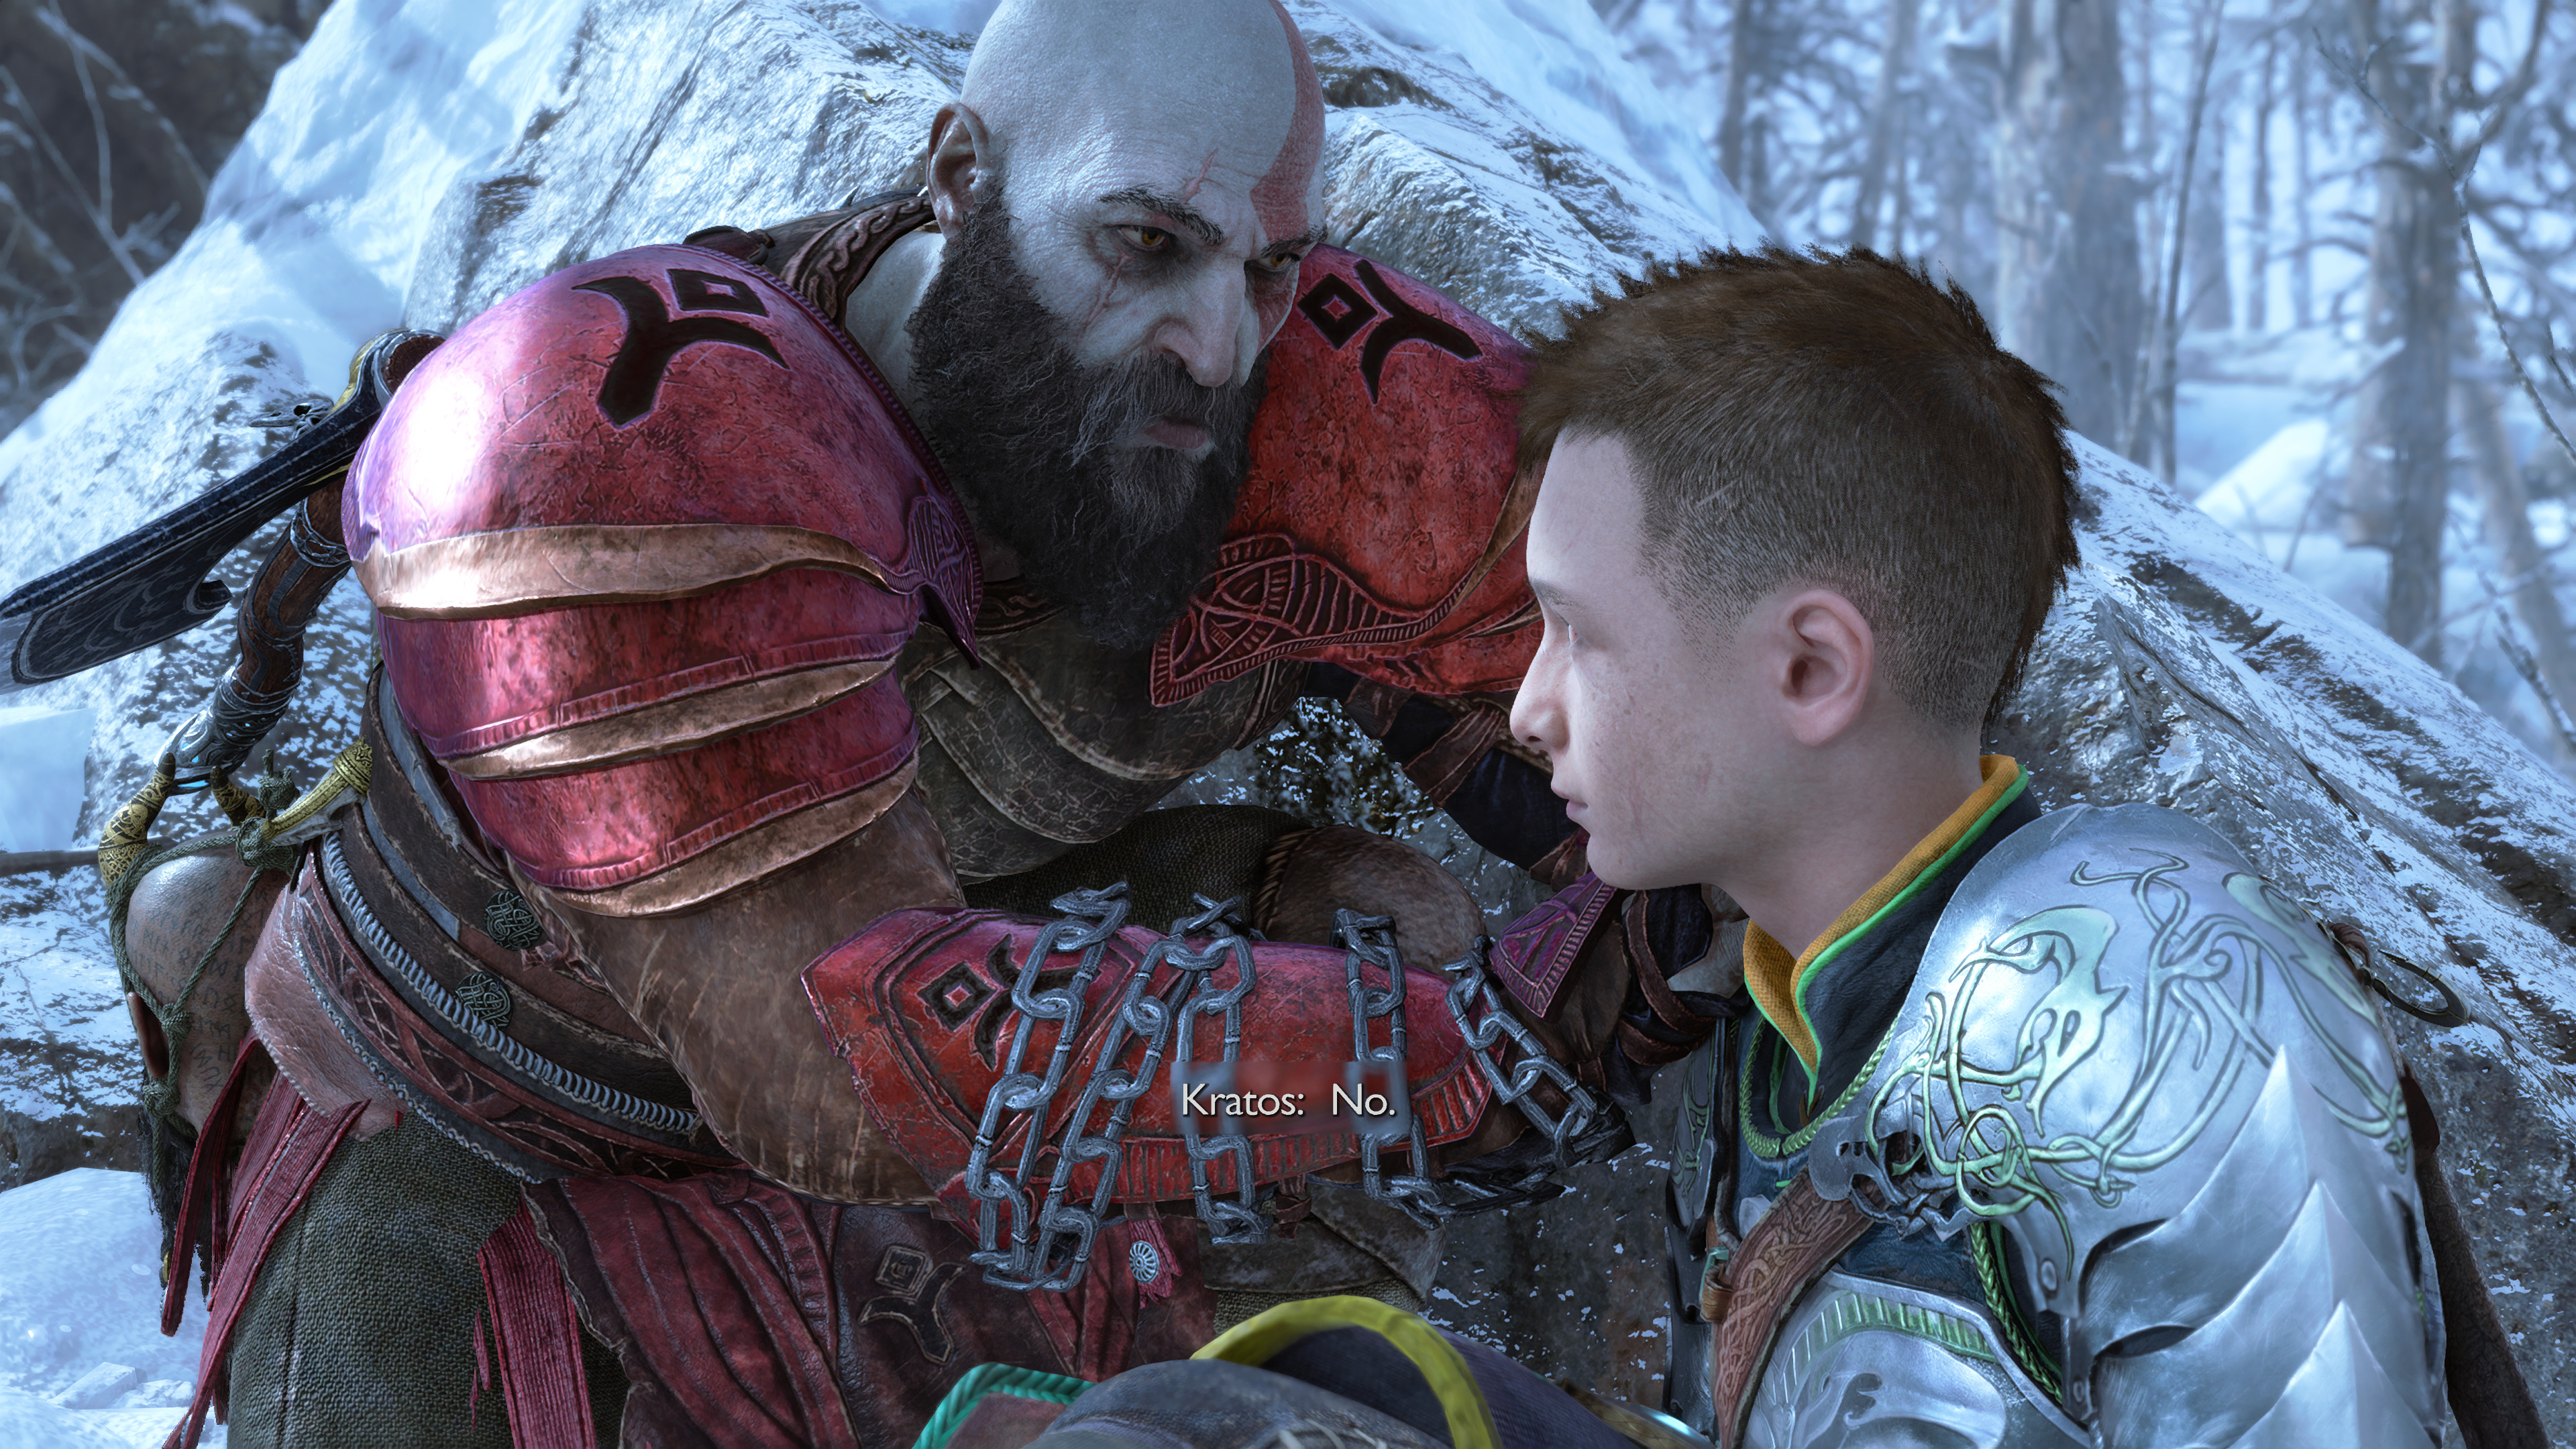 Review: God of War Ragnarök is one of the best PlayStation games ever